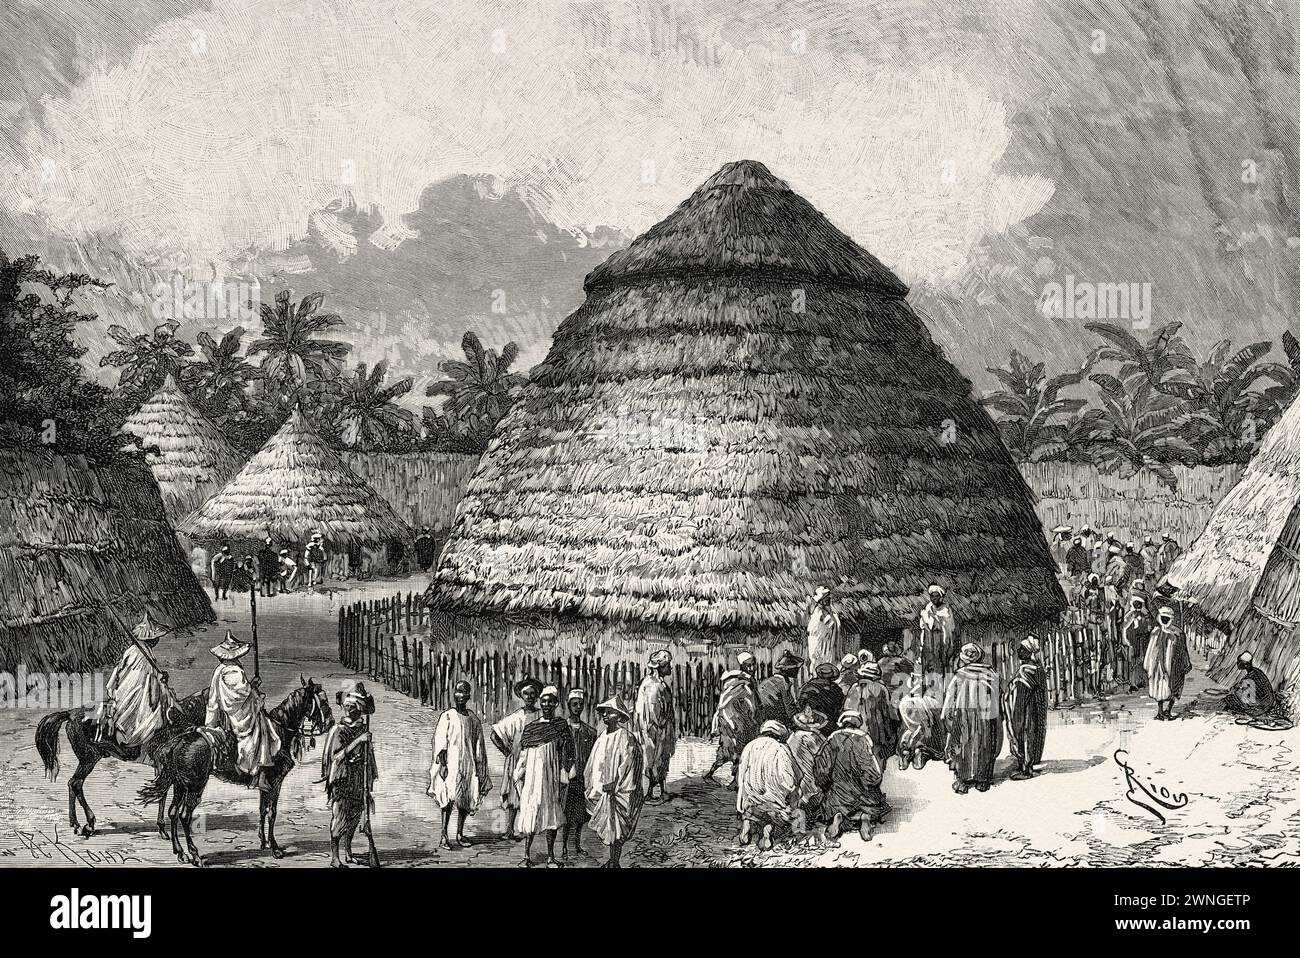 Reception of the mission in Fougoumba, Guinea. Africa. Two campaigns in French Sudan, 1886-1888 by Joseph Simon Gallieni (1849 - 1916) Le Tour du Monde 1890 Stock Photo